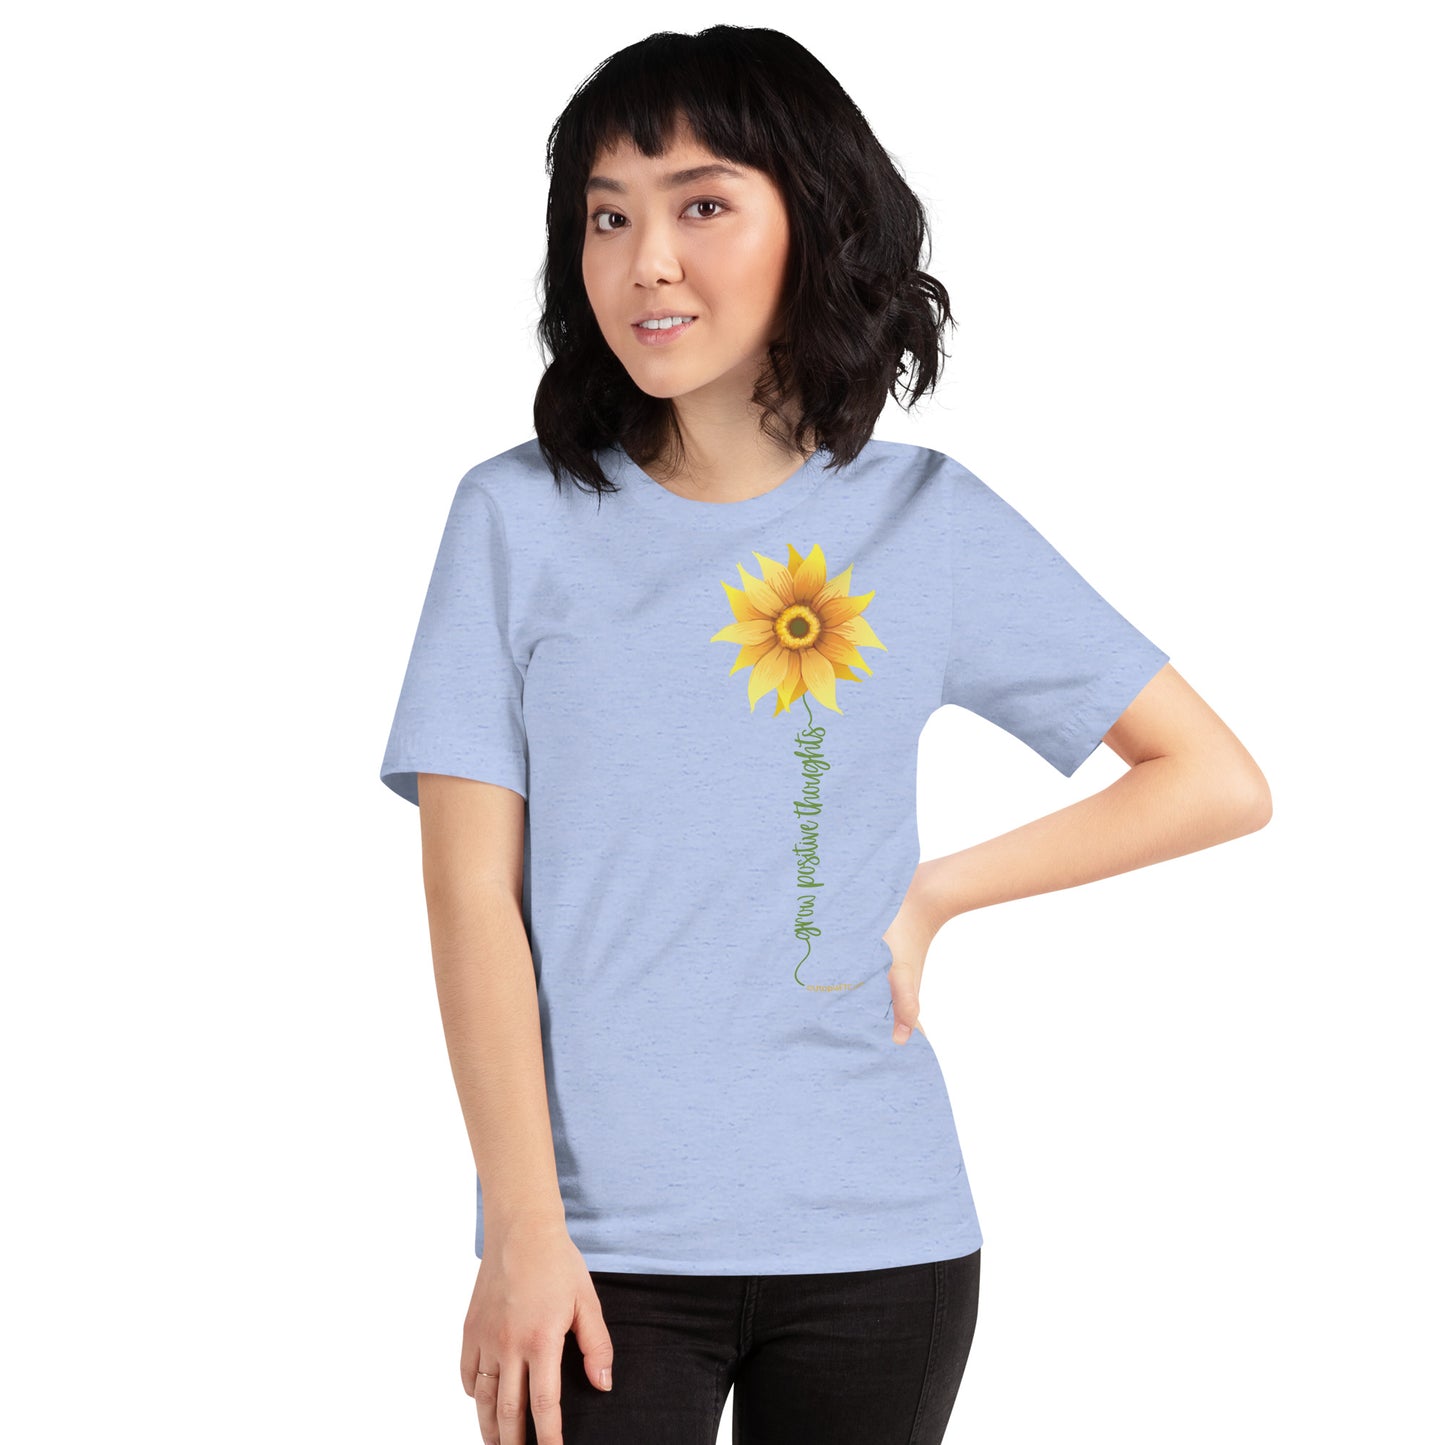 Grow Positive Thoughts P306 Unisex T-shirt